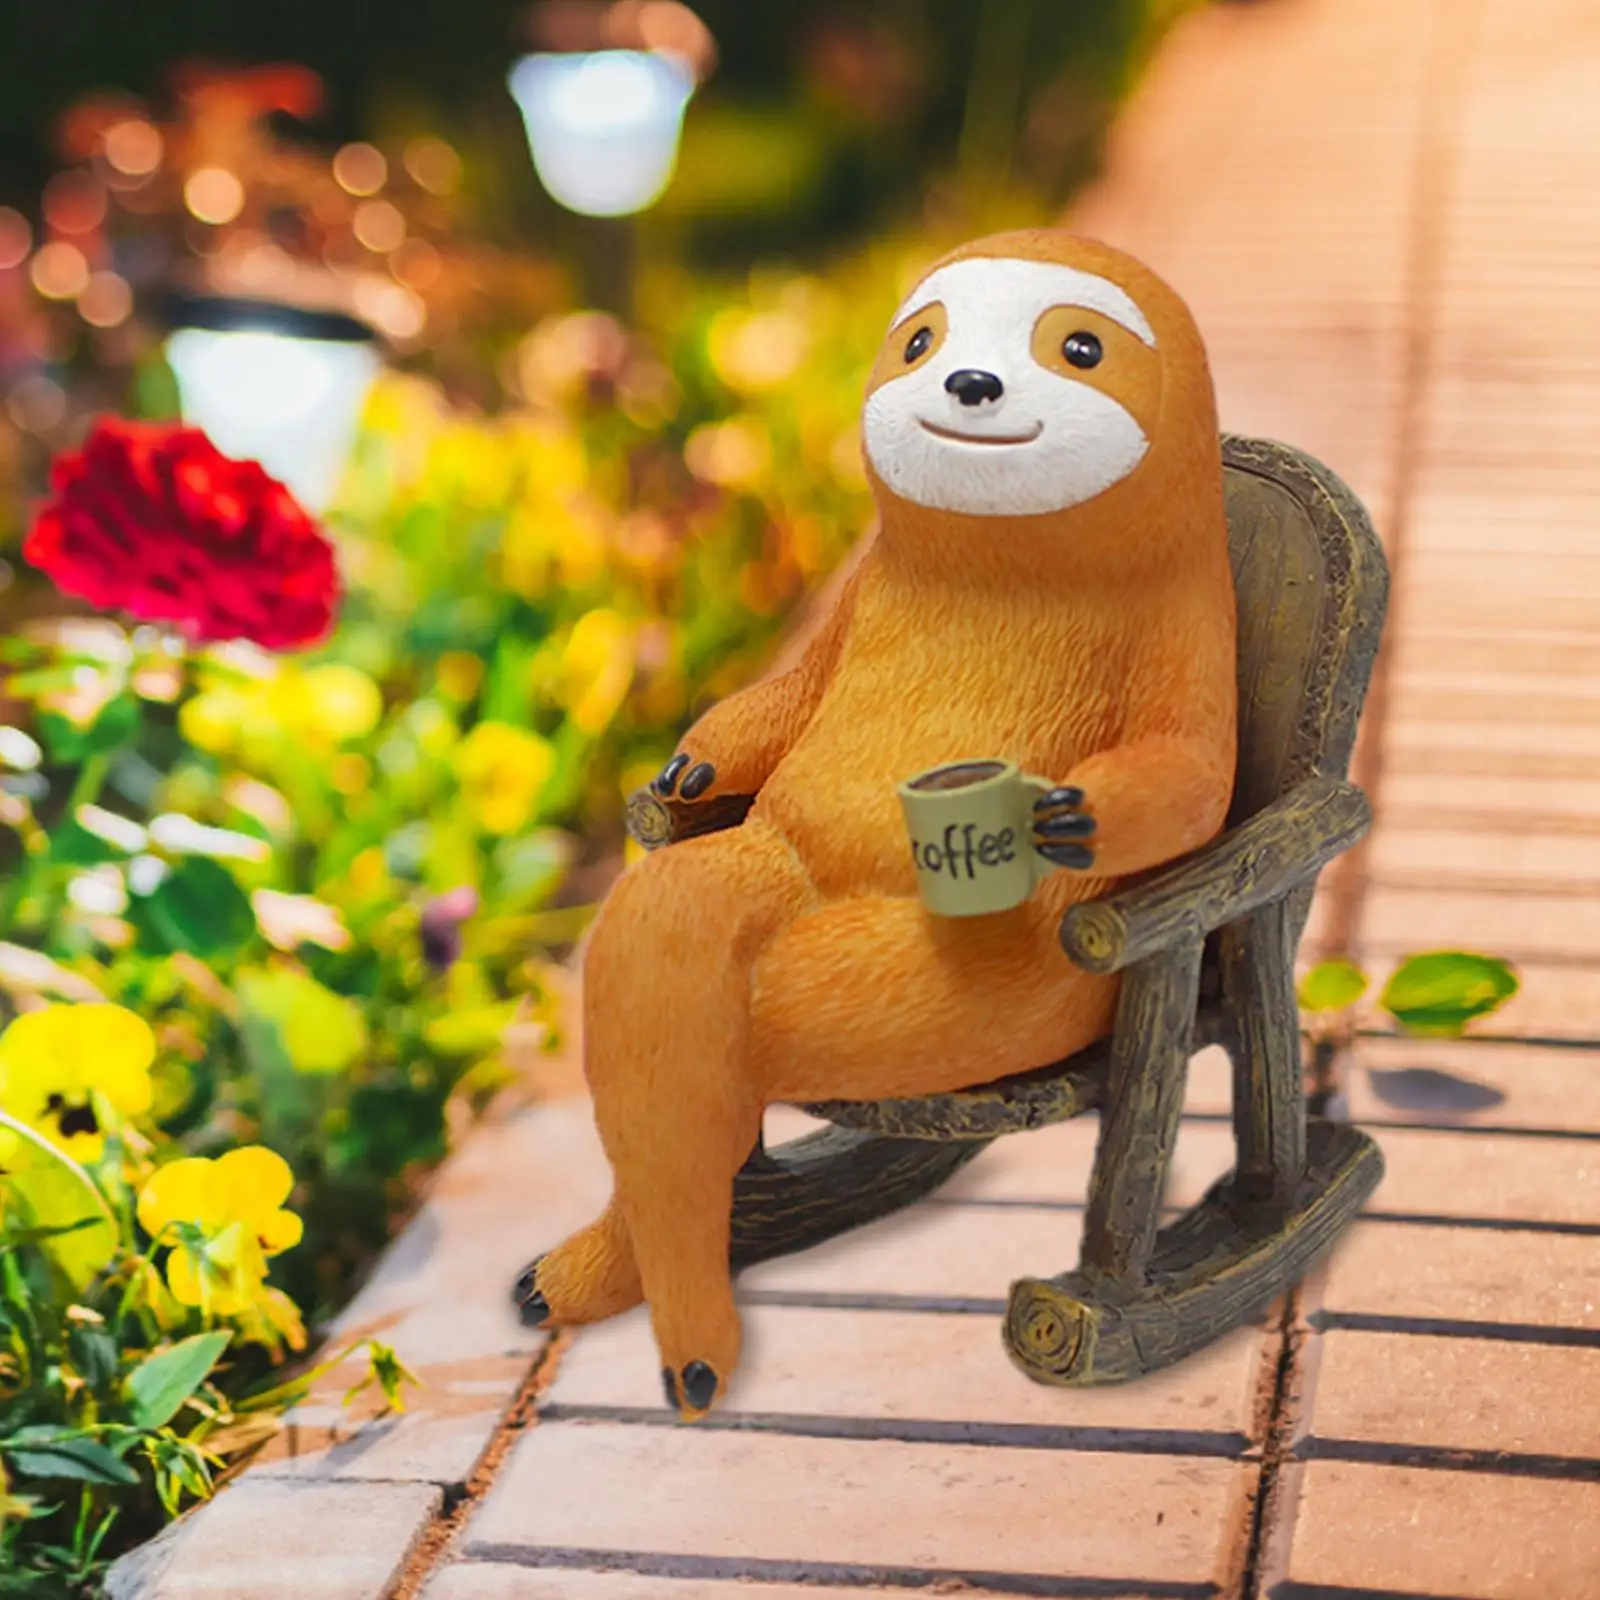 

Resin Rocking Chair Sloth Figurine Art Decorative Sculpture for Yard Tabletopper Outdoor Home Garden